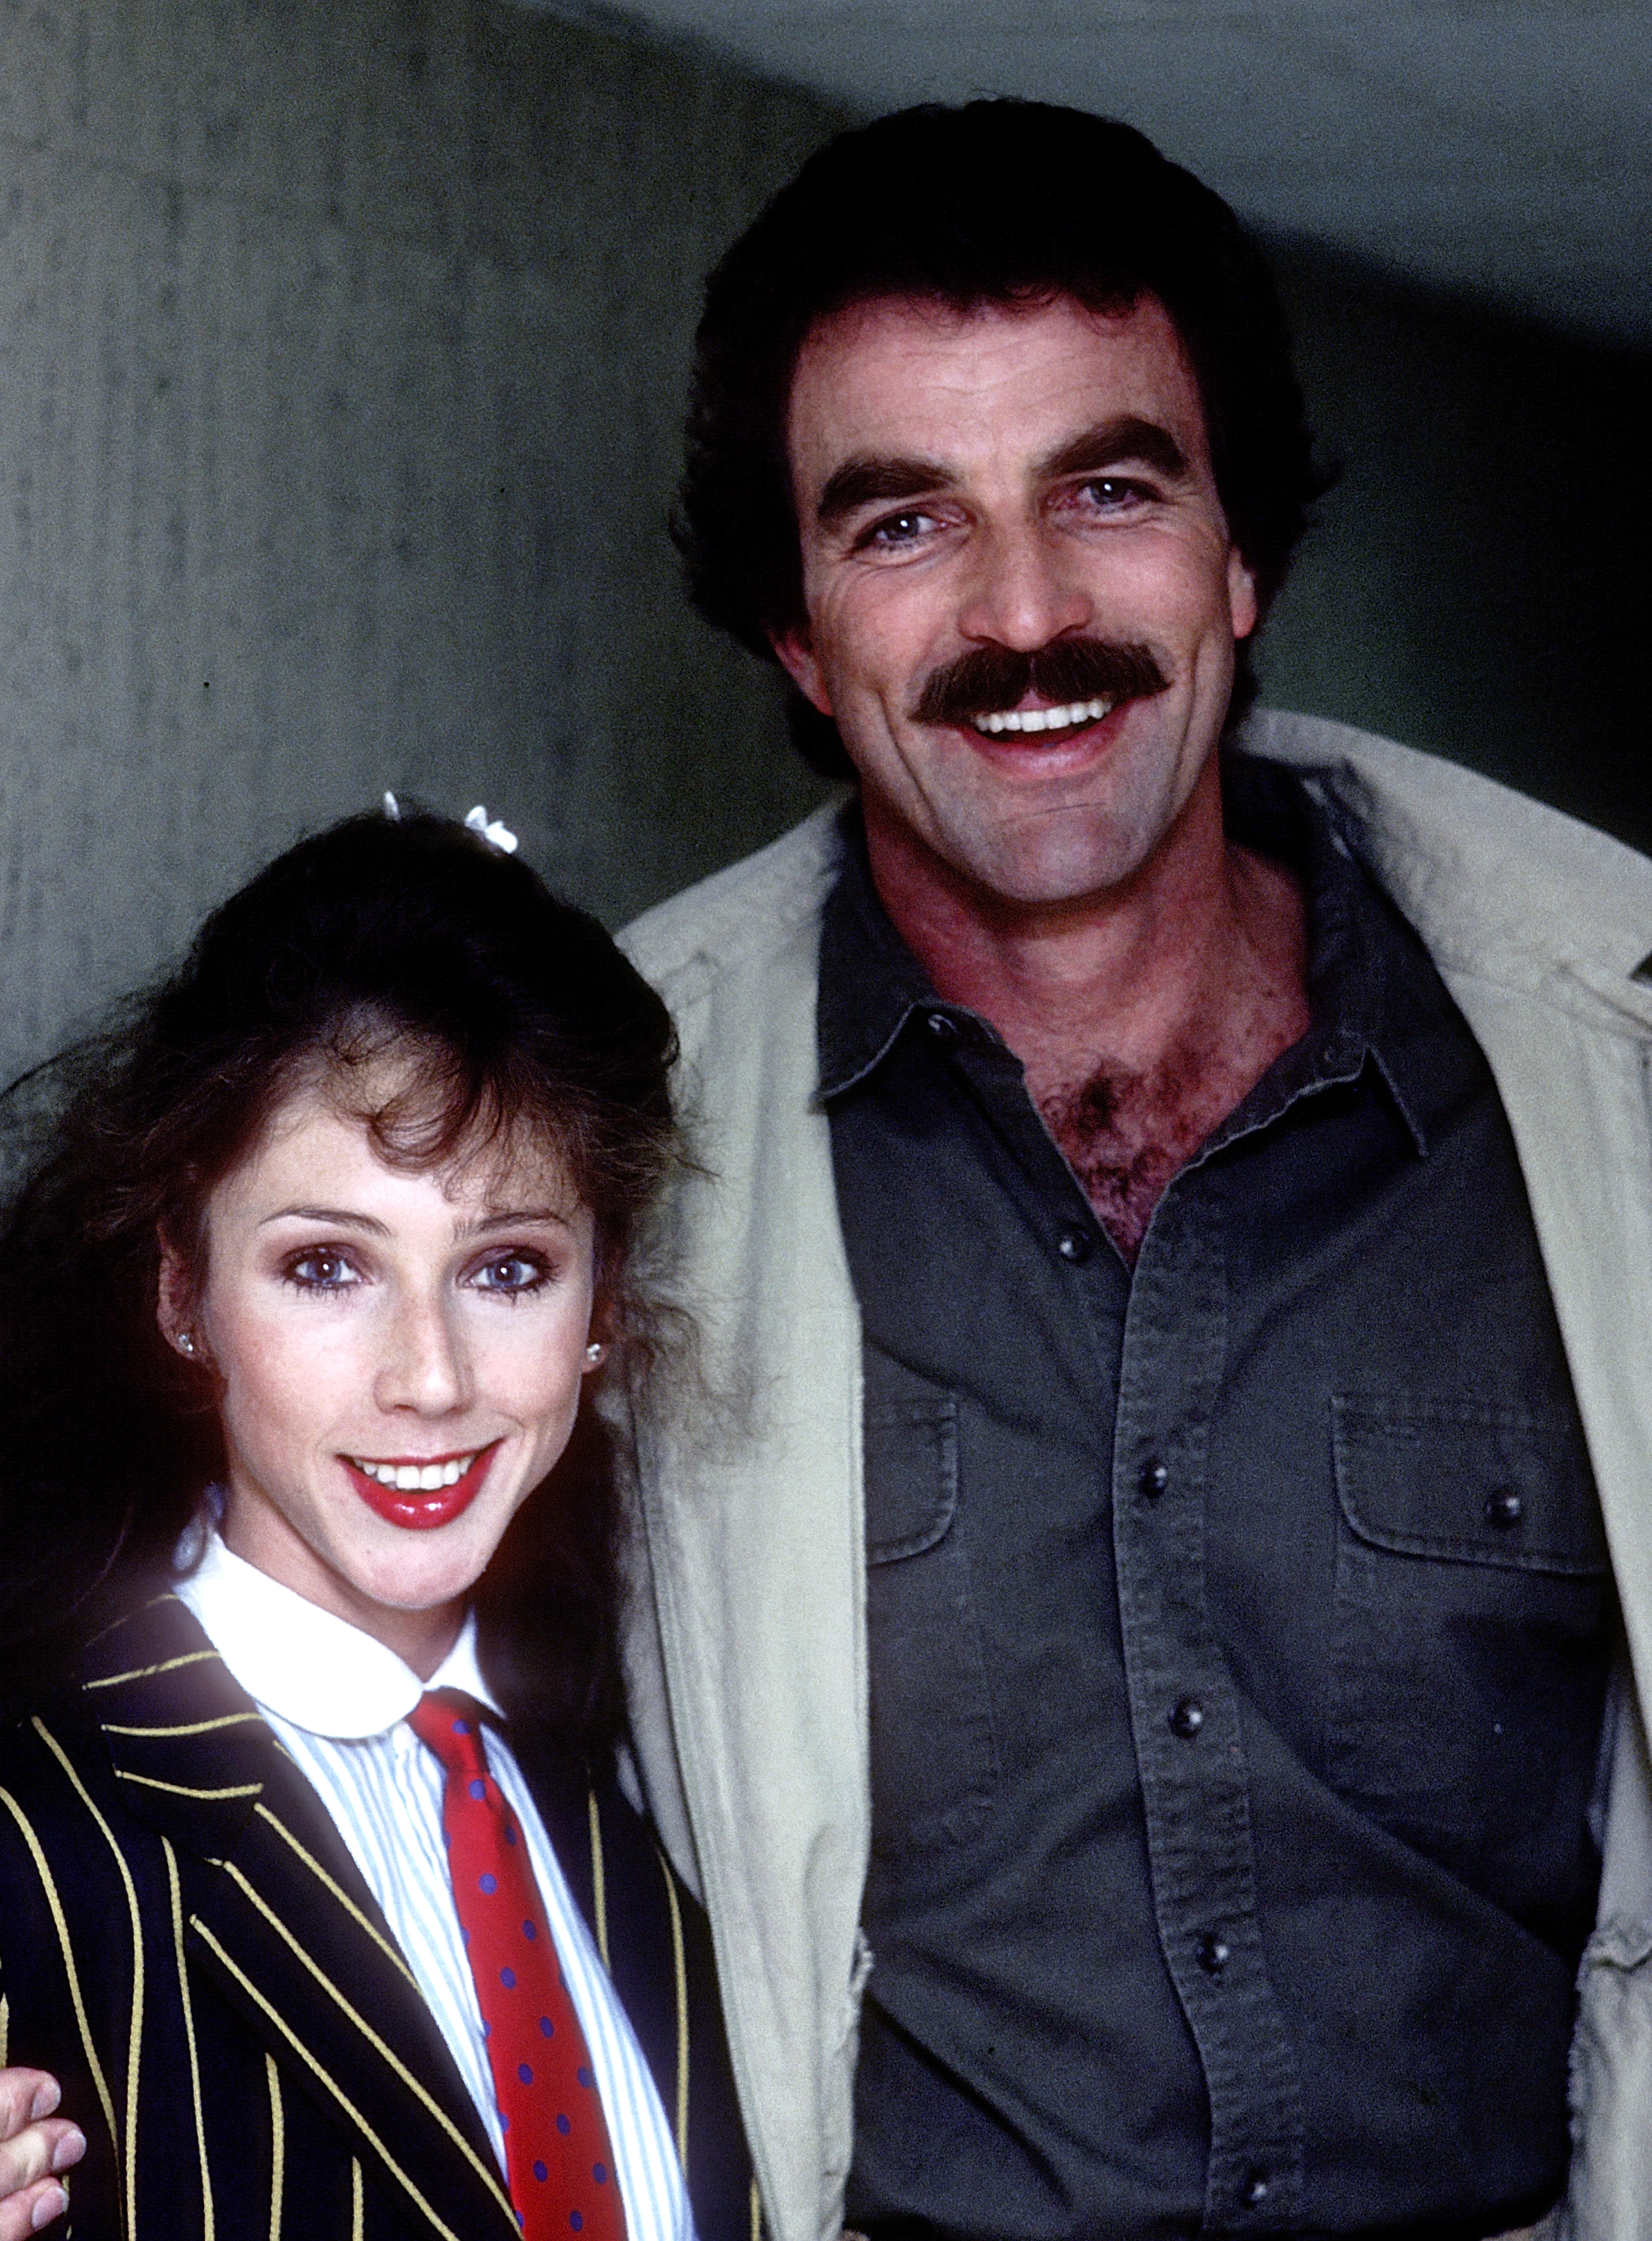 Jillie Mack and Tom Selleck visit "Late Night with David Letterman" at Studio 6A, NBC Studios, 30 Rockefeller Plaza in New York City on May 23, 1985. | Source: Getty Images